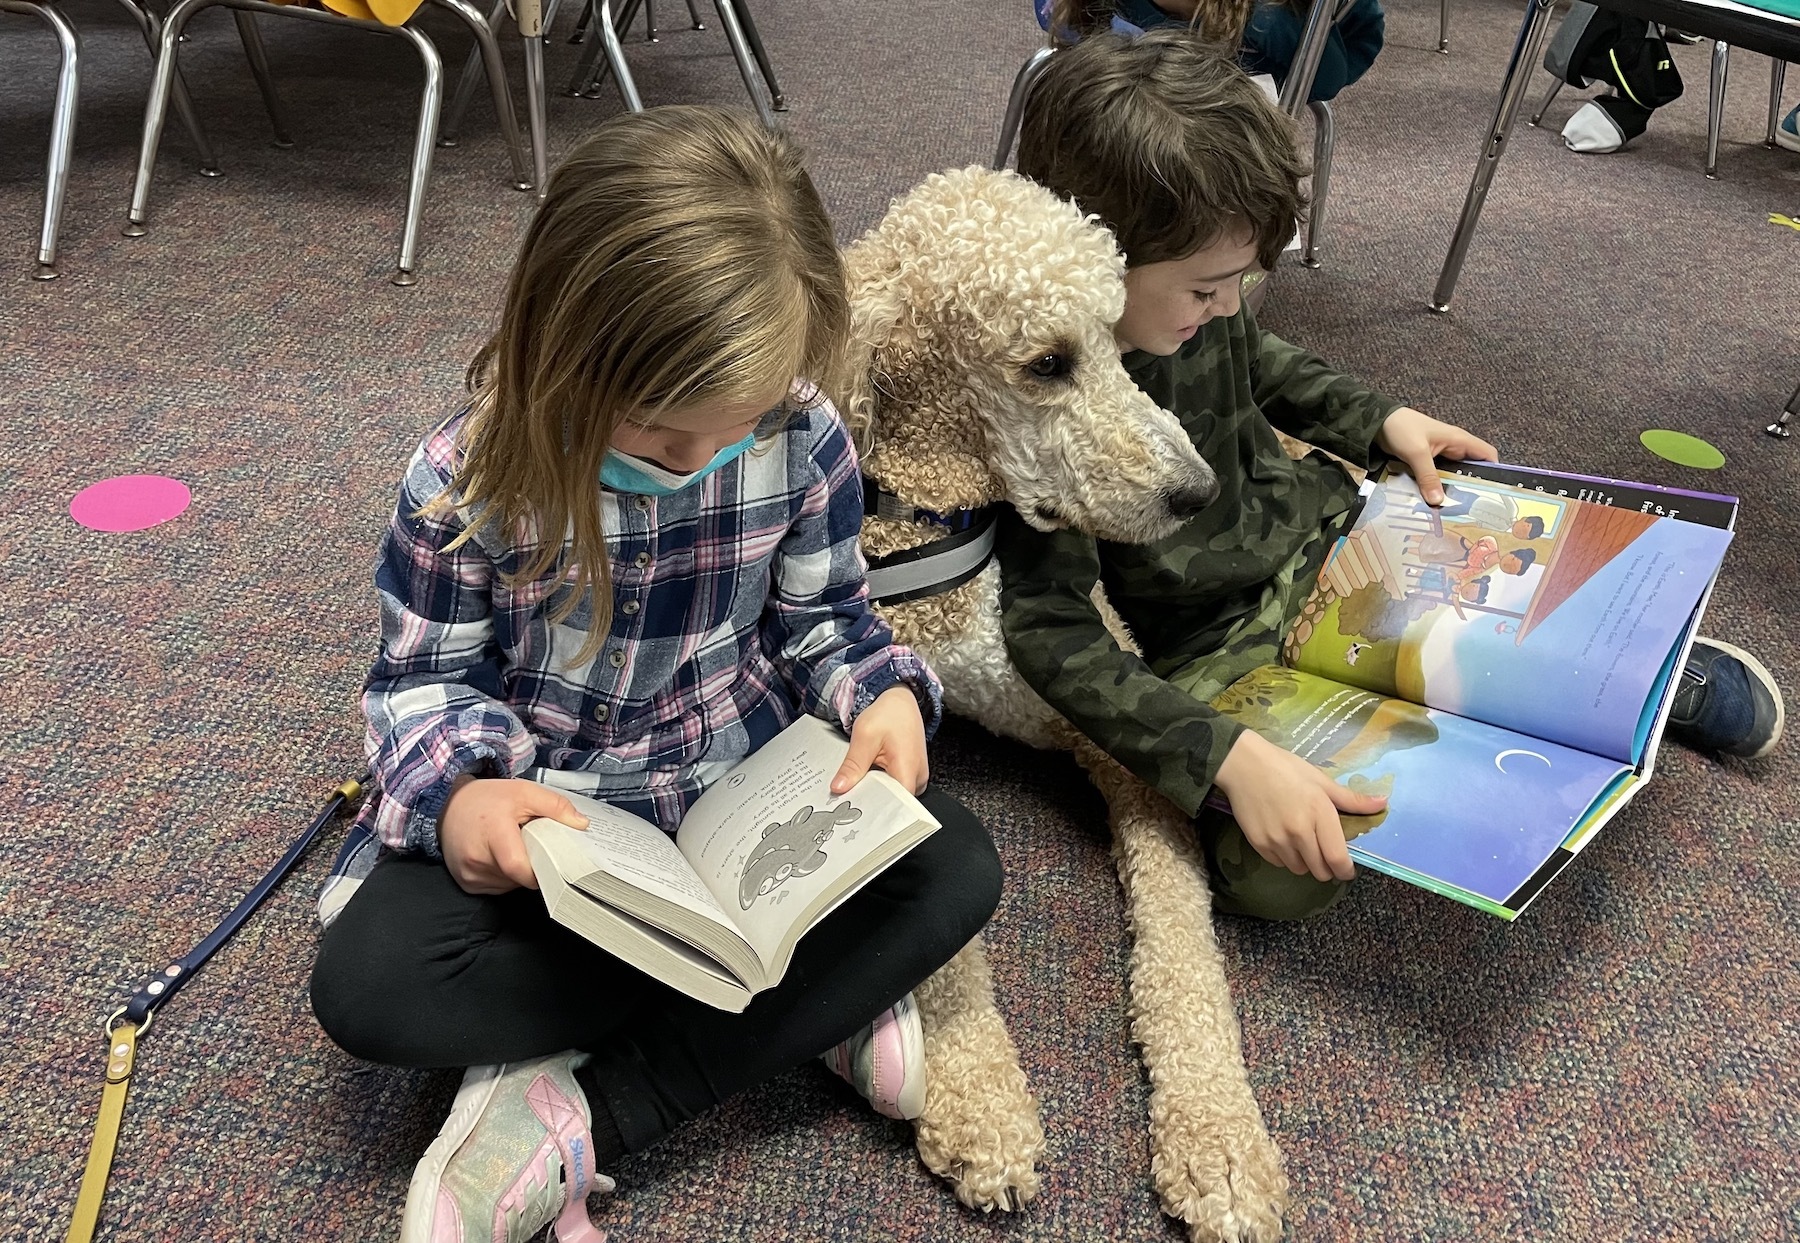 Sandee reading with kids